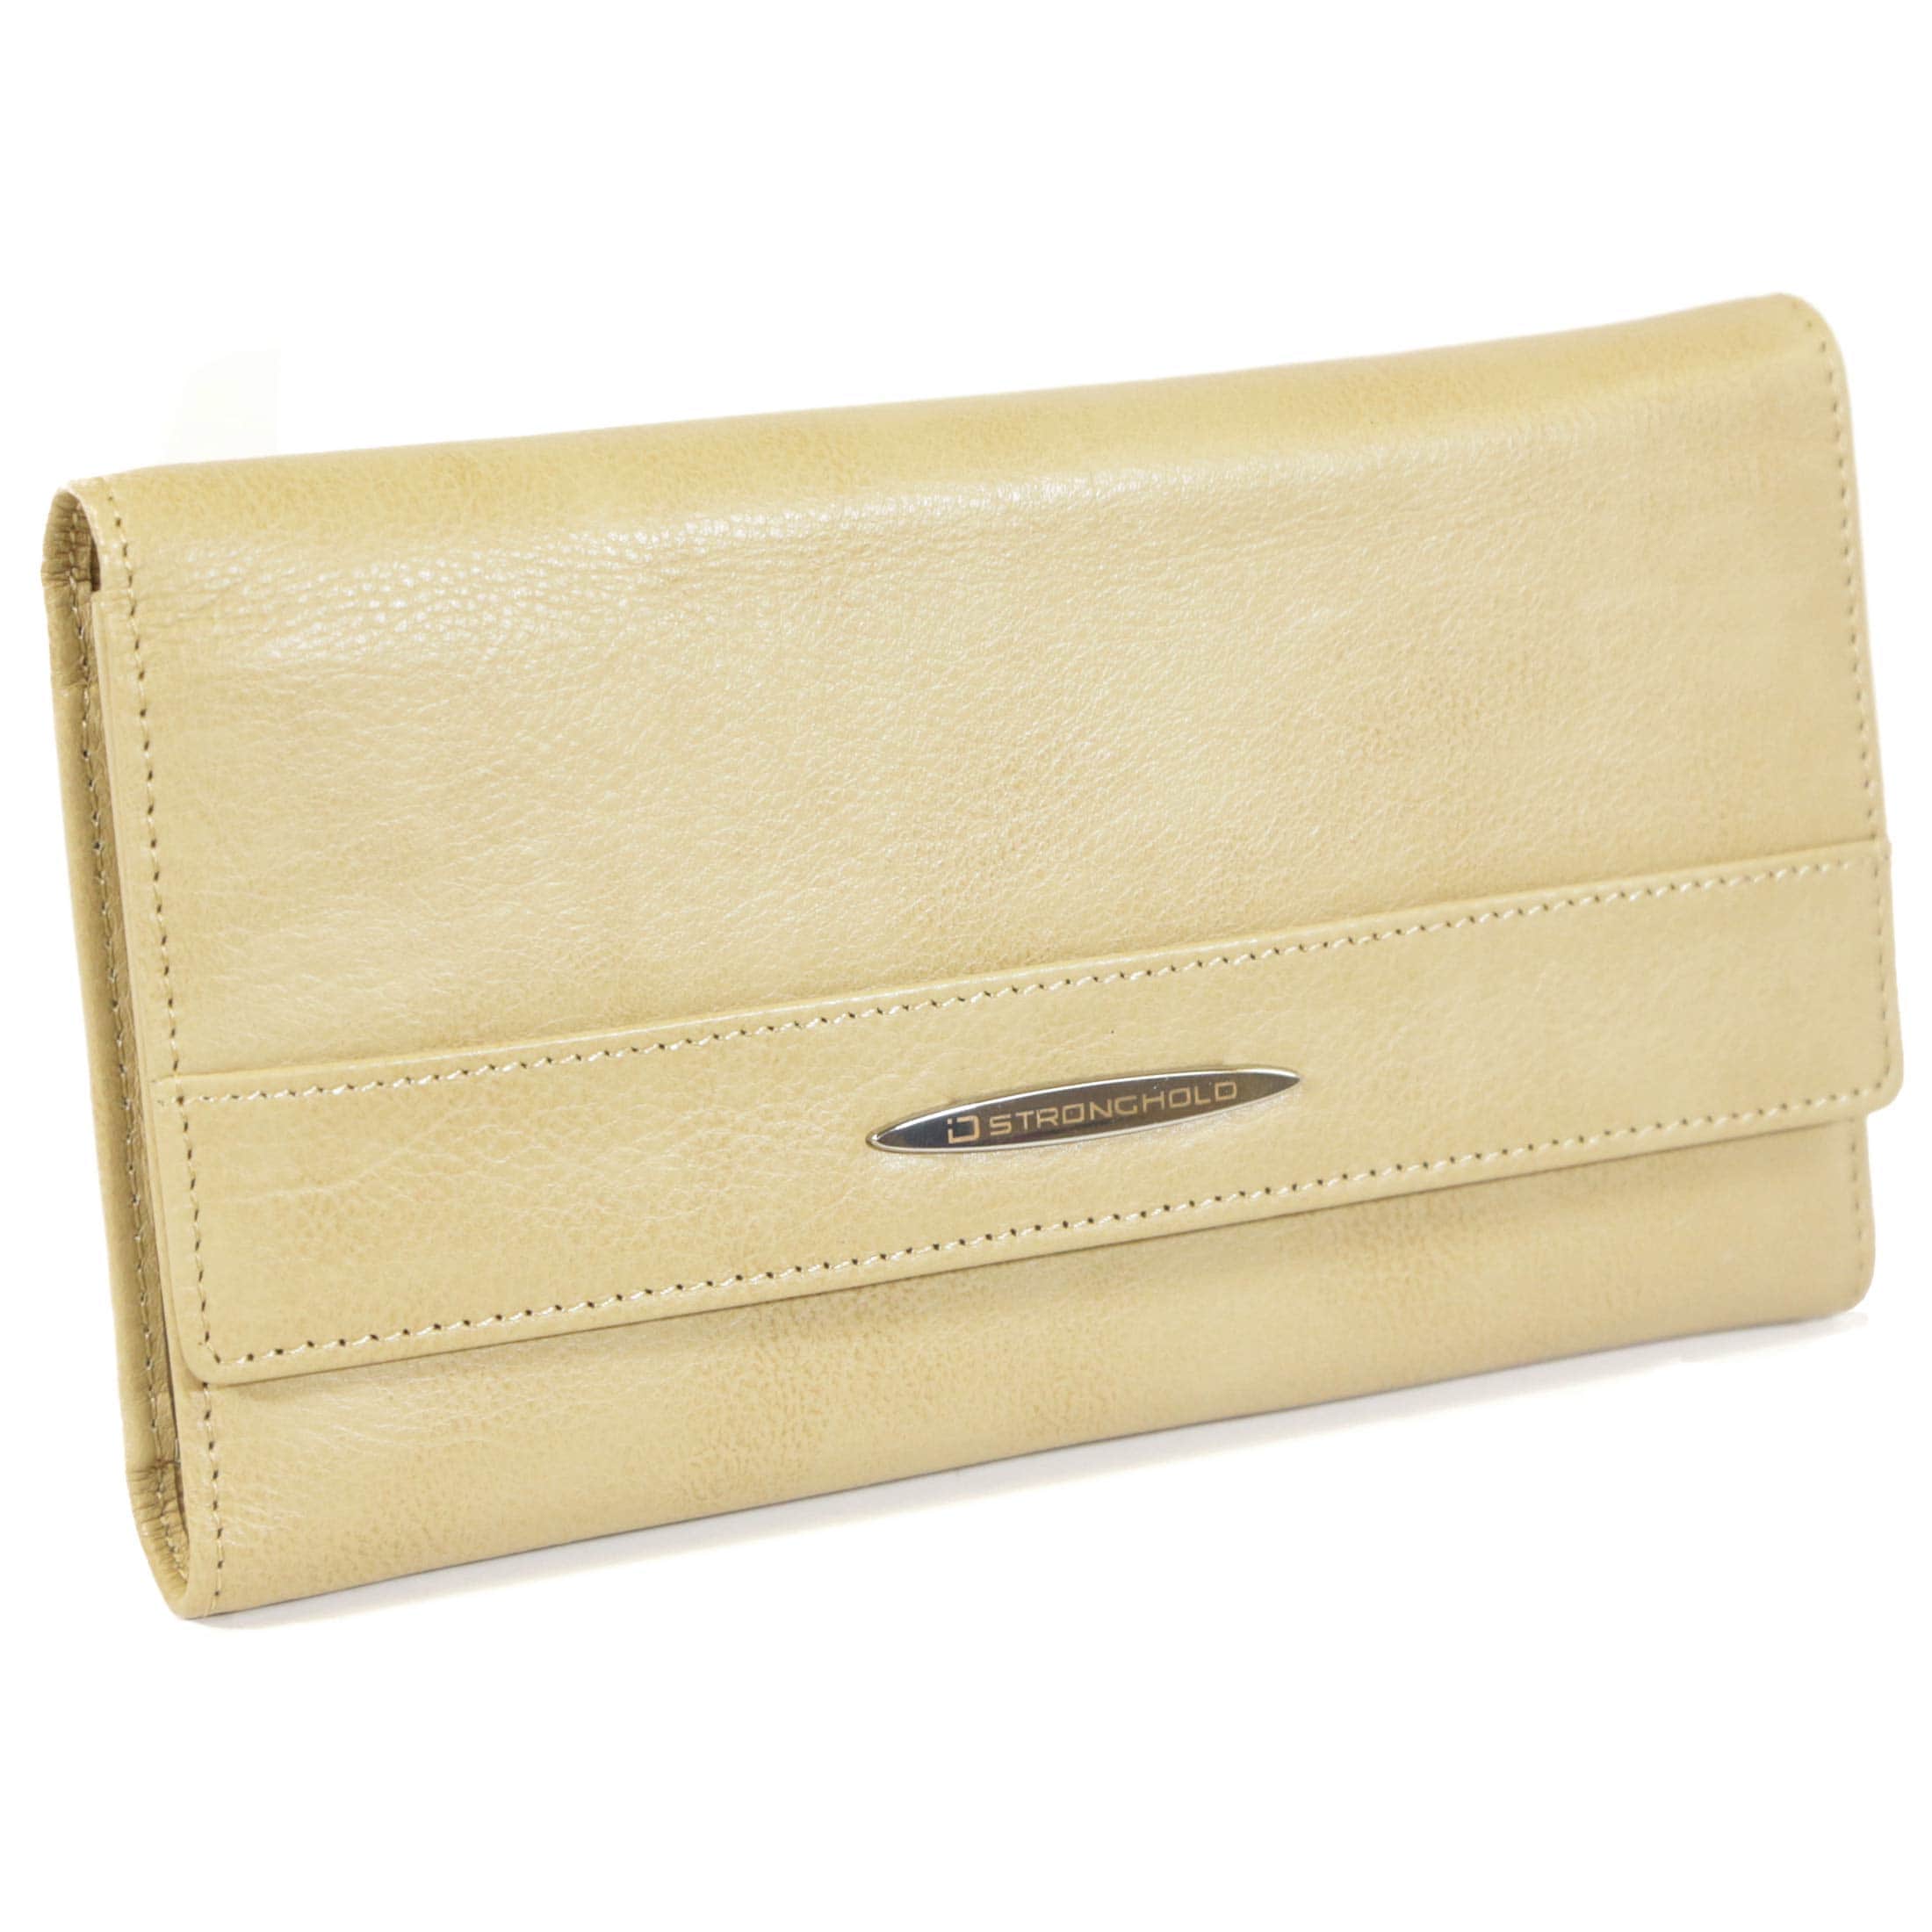 ID Stronghold Ladies Wallet Checkbook Camel Womens RFID Wallet Deluxe Checkbook Clutch